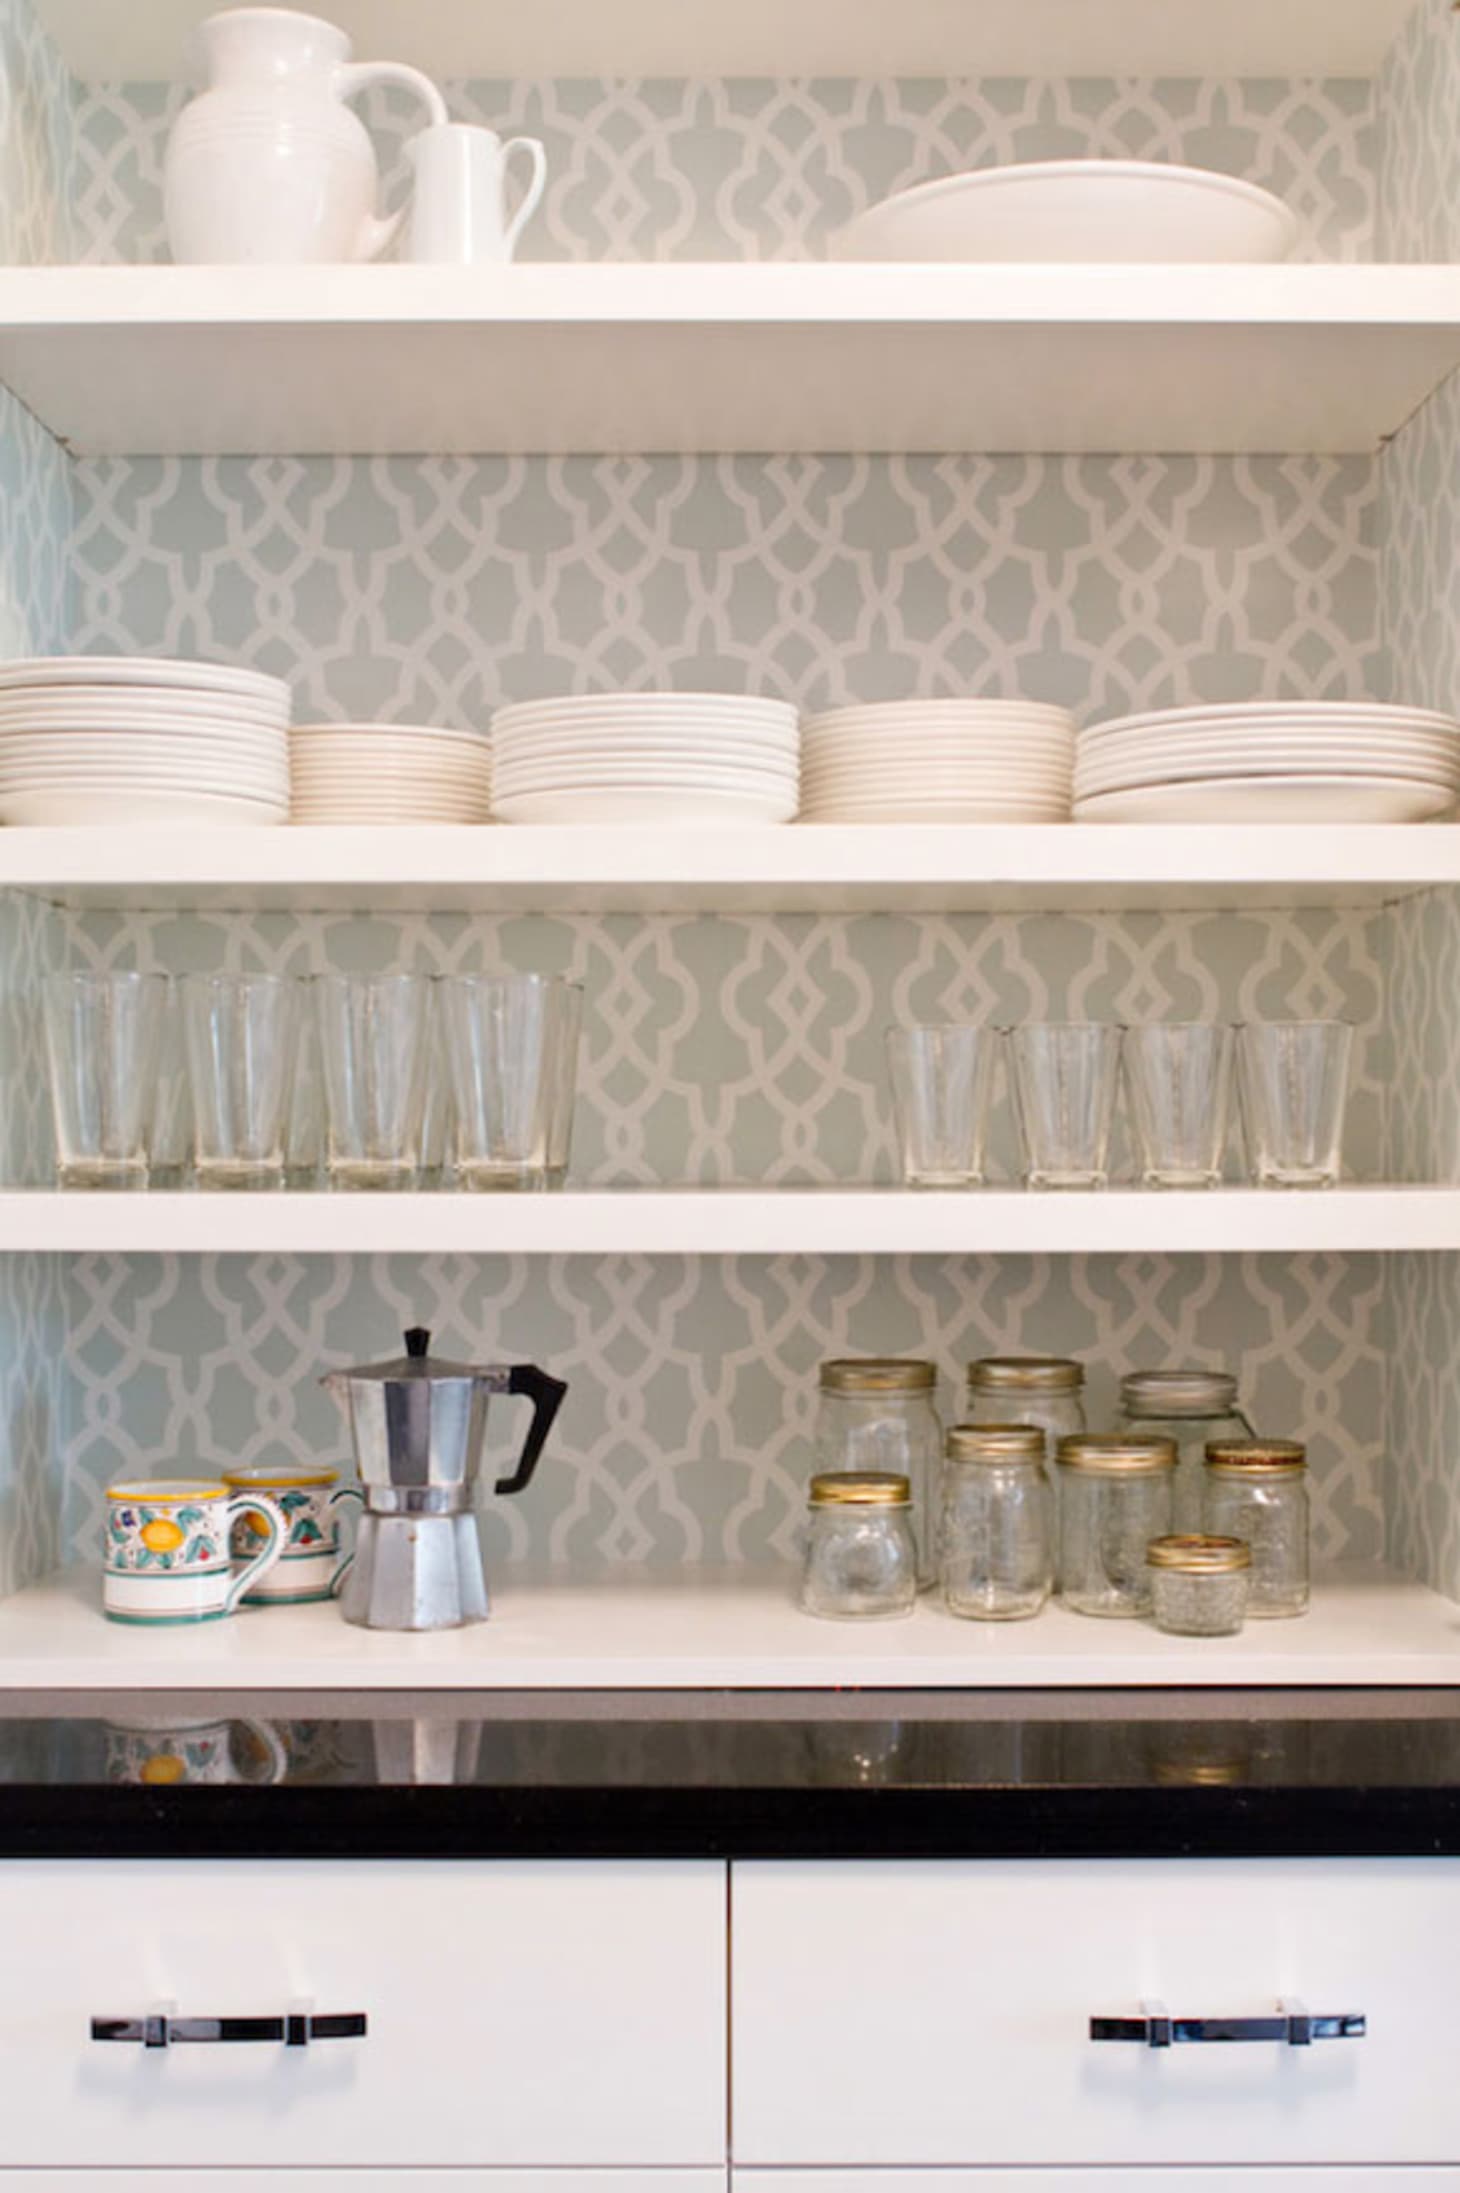 6 Clever Ways To Customize Kitchen Cabinets With Contact Paper